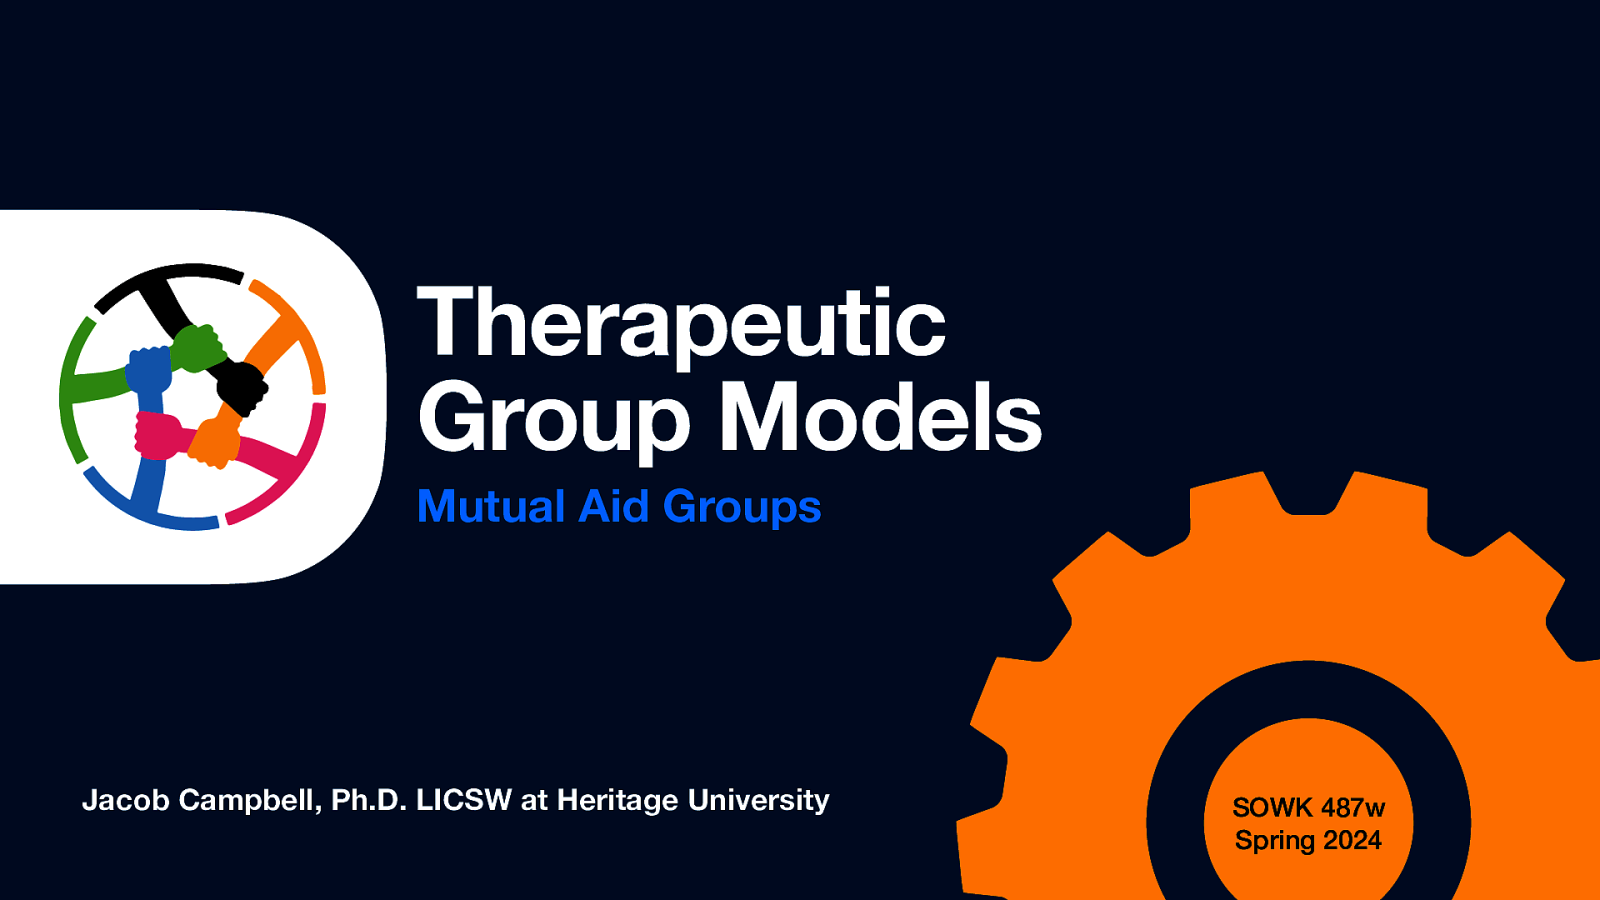 Spring 2024 SOWK 487w Week 11 - Therapeutic Group Models - Mutual Aid Groups